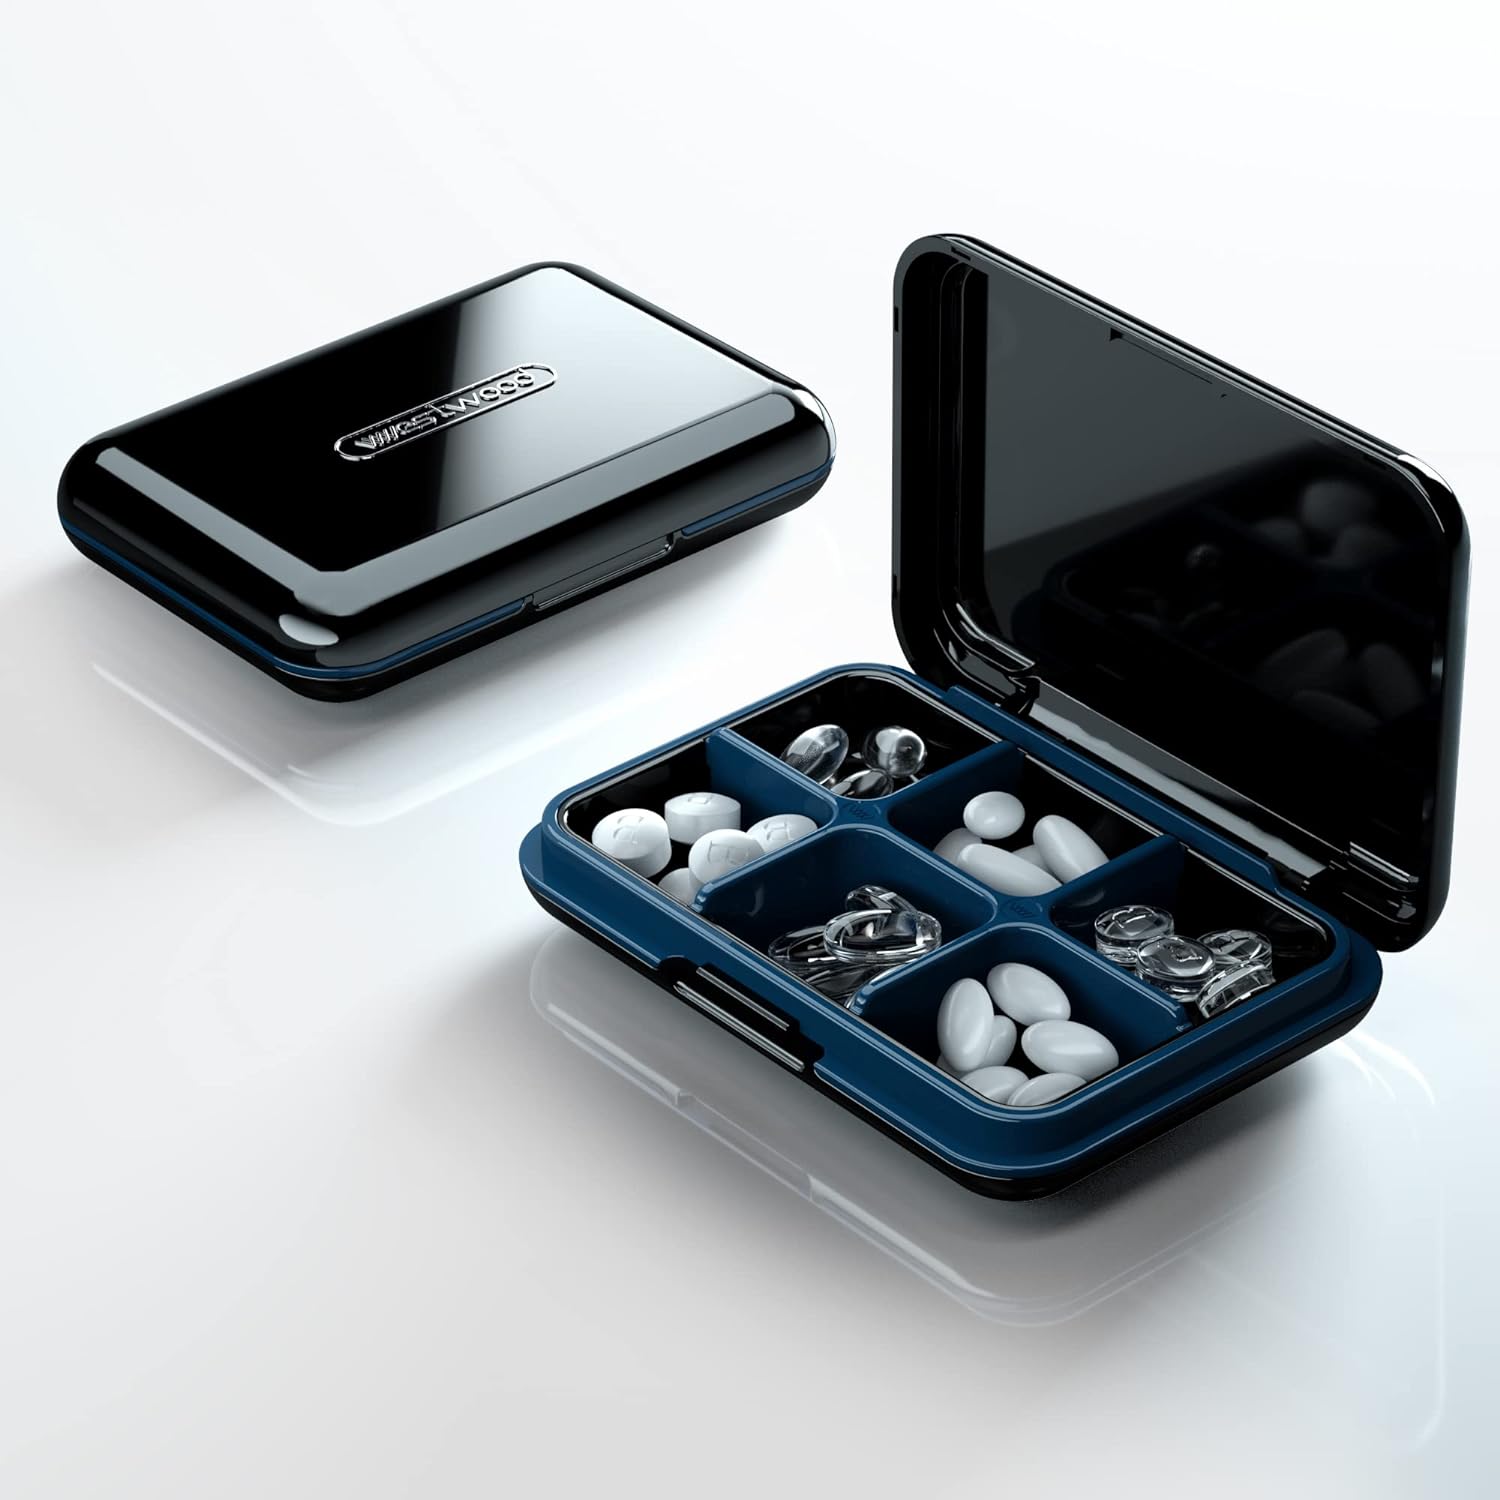 This pill case is a clear cut above the many cheap pill cases with similar volume. I wanted a case in which I can separate several different medications, and that is built to last and be secure, and that also has real moisture resistance. This case is unusual in meeting all of those requirements, and in looking classy and being compact. The case is made of sturdy plastic, although the cover hinges have metal pins in them, and the six compartments inside do not have the flimsy, easily breakable a